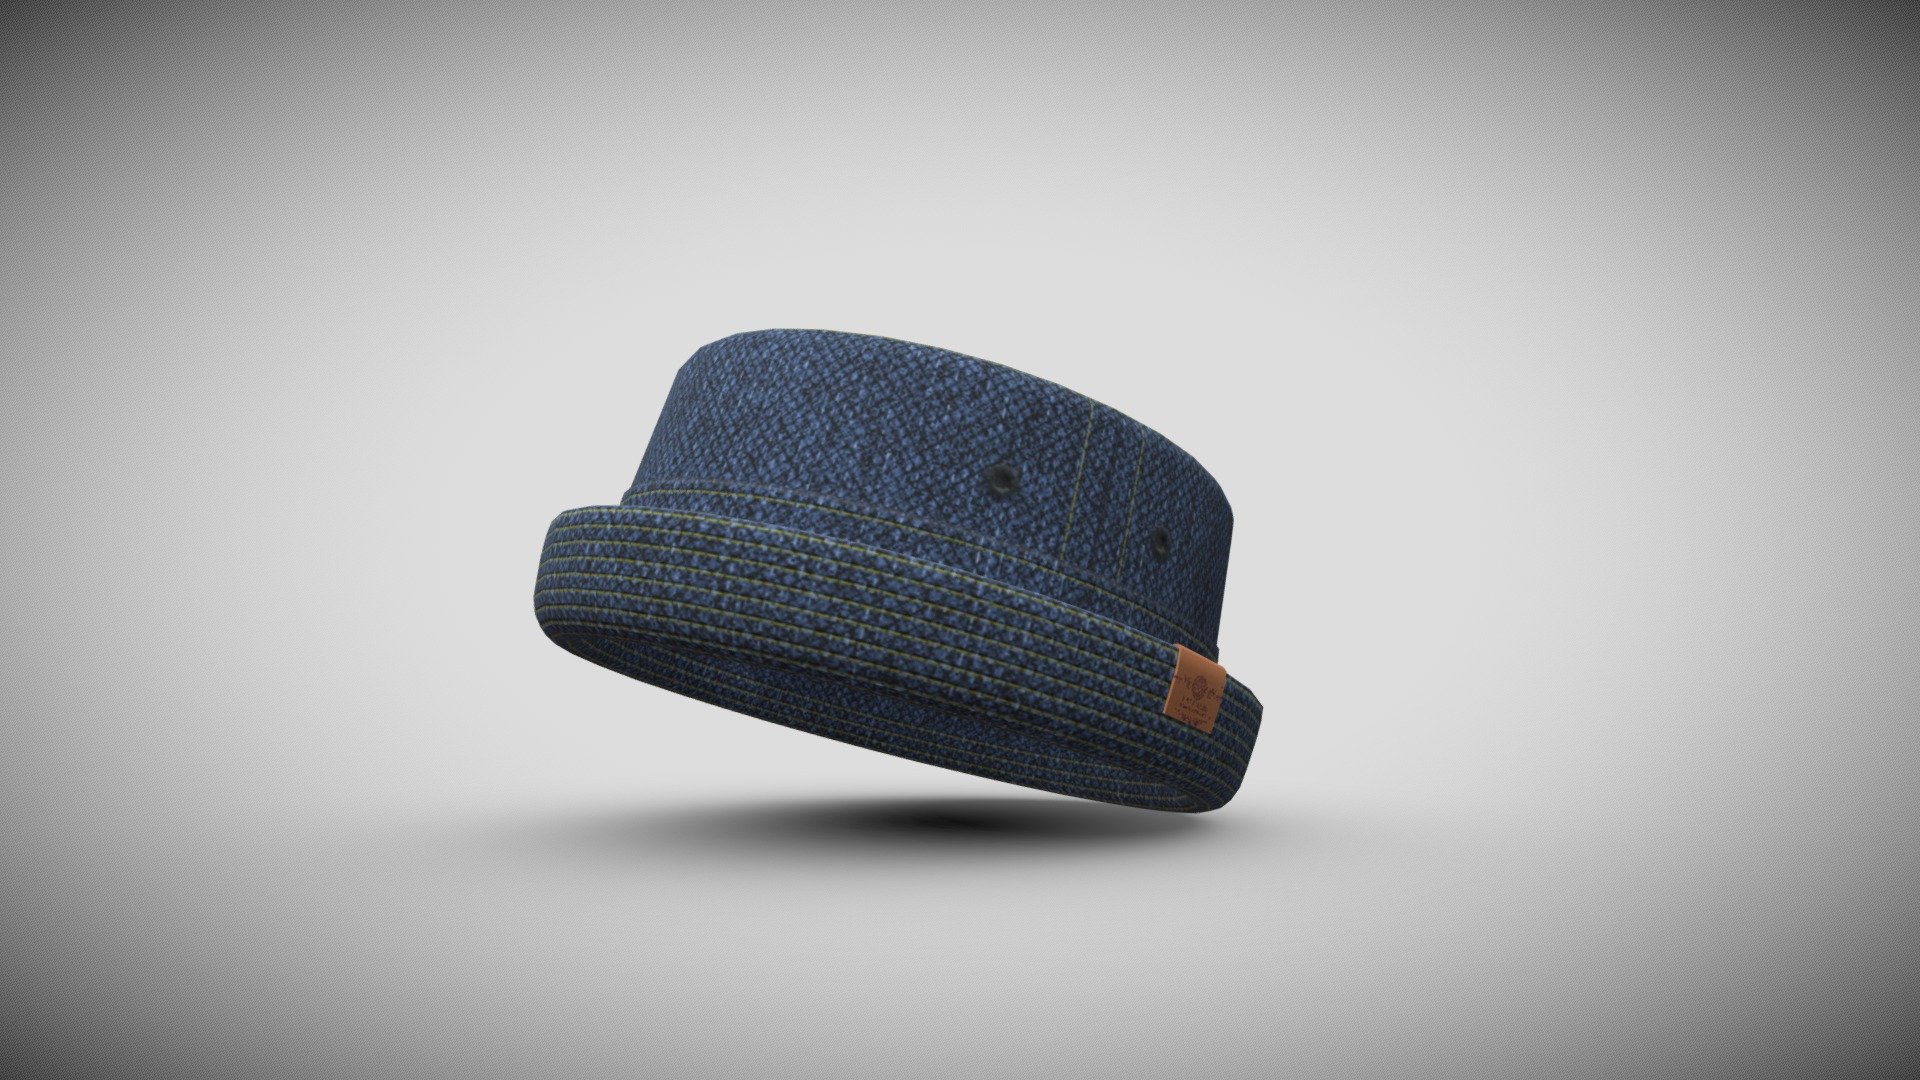 A hat with a low, flat, cylindrical top, a distinctive ruff, and a narrow brim that curls up slightly

It is adjusted with the VRM humanoid model output from VRoidStudio.








For Sketchfab's convenience, the time when direct sales will be available is yet to be determined.

If you want to go to an external sales site, you can do so via the following tweet.

https://twitter.com/ayuyatest/status/1526507900289417216?s=20&amp;t=s_Wzx6se8CEg9hct1oKacw - terrapinch_hat-Denim_Navy💮📷 - 3D model by ayumi ikeda (@rxf10240) 3d model